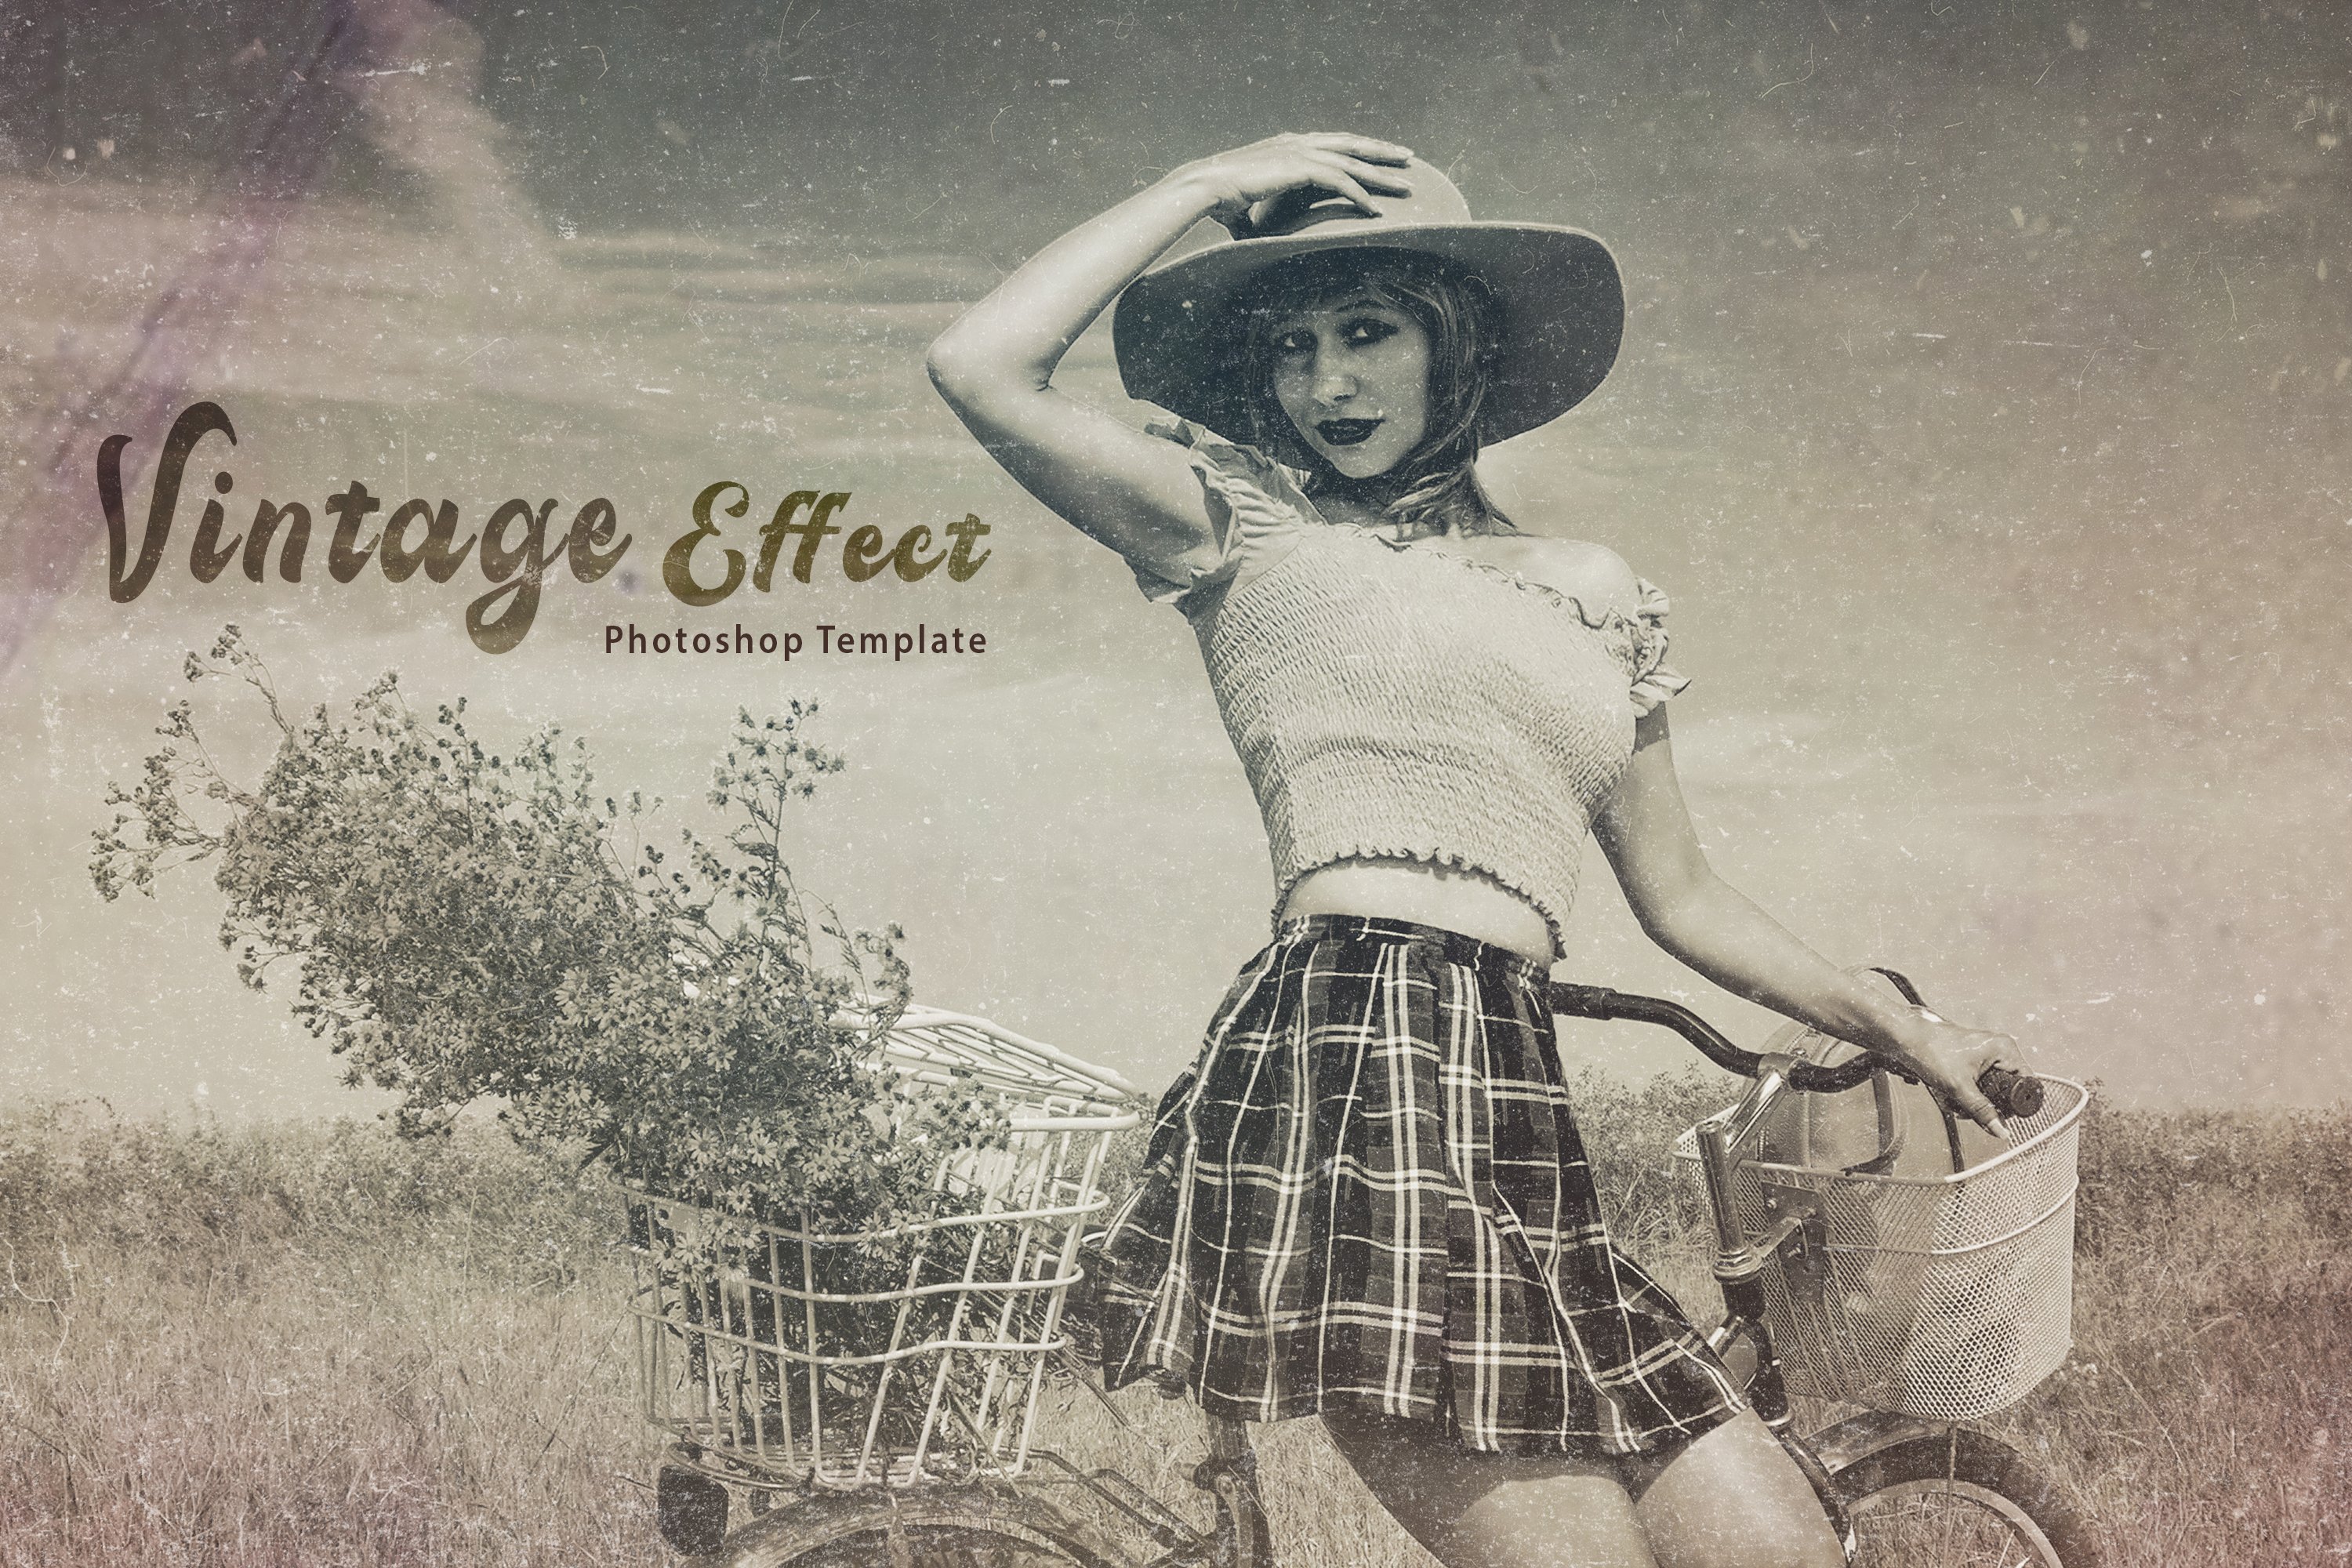 Vintage Old Photo Effectcover image.